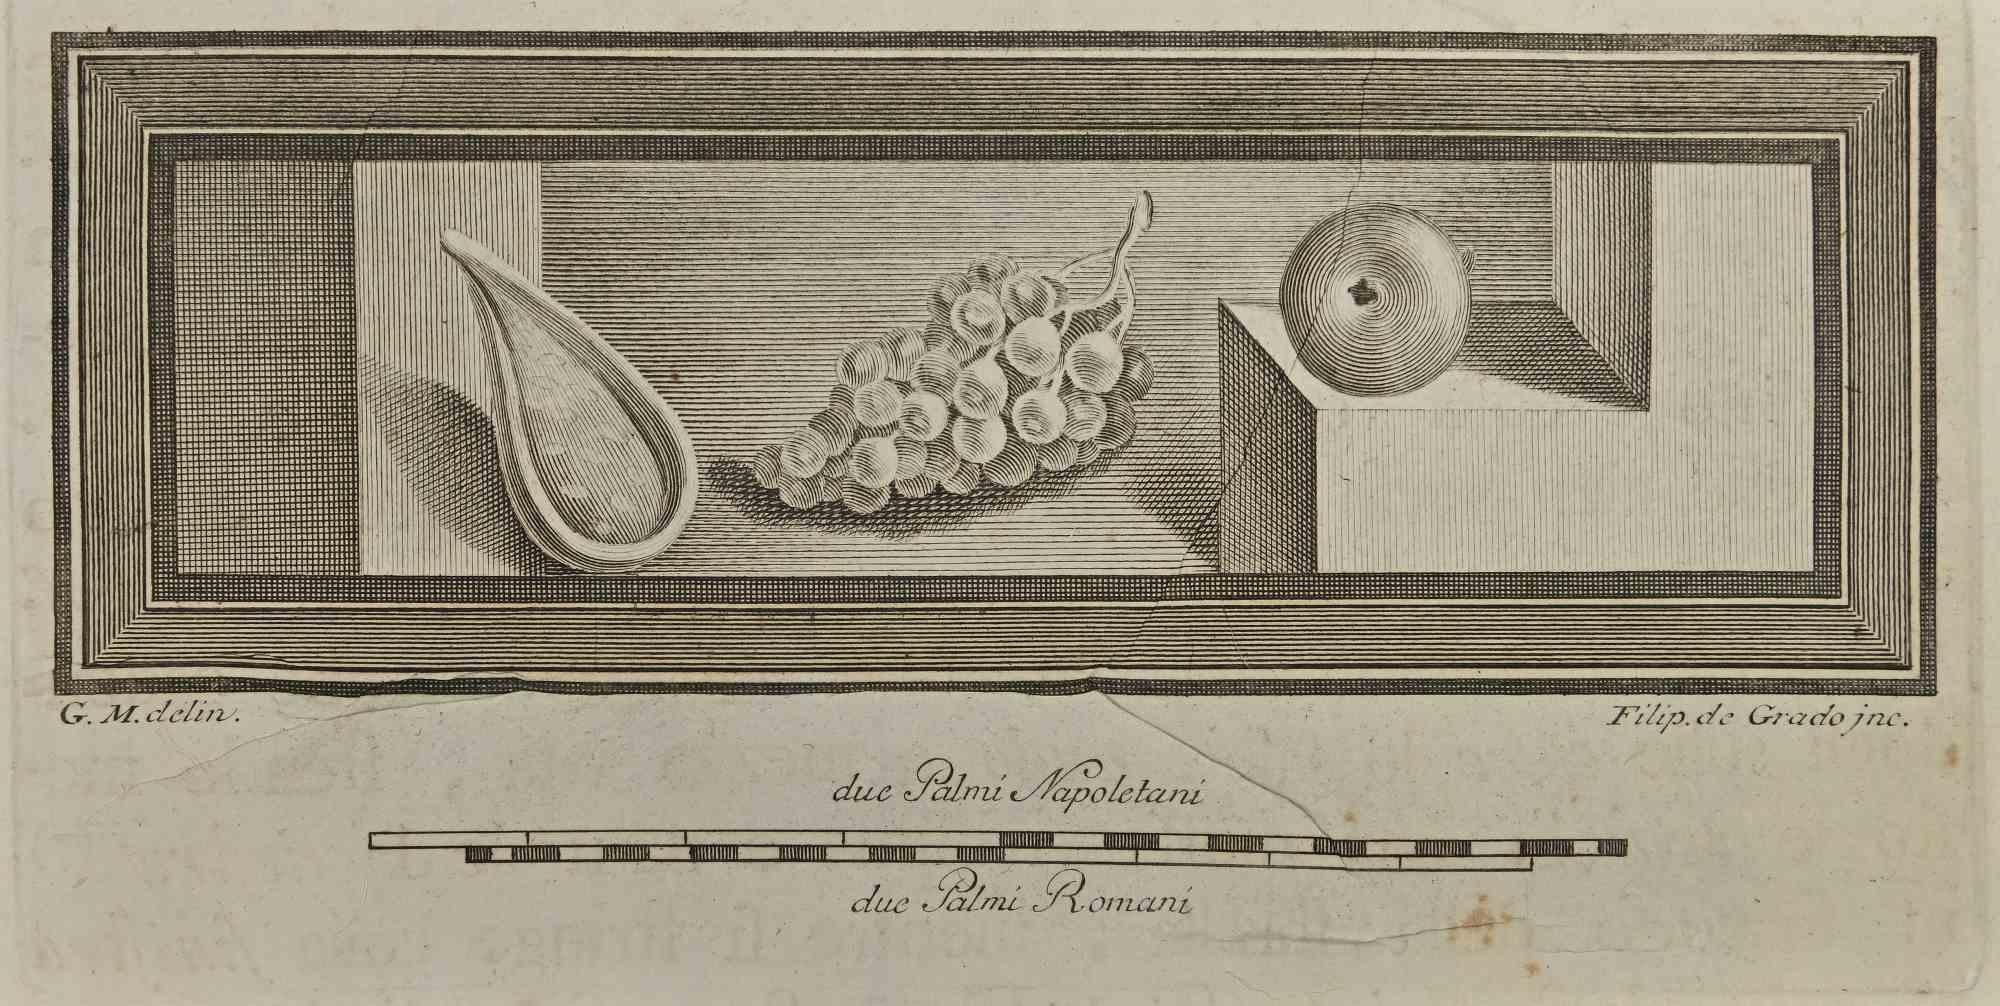 Ancient Roman Still Life in Herculaneum, from the series "Antiquities of Herculaneum Exposed", is an etching realized by Filippo de Grado in the late 18th century.

Signed on The plate

Good conditions.

The etching belongs to the print suite